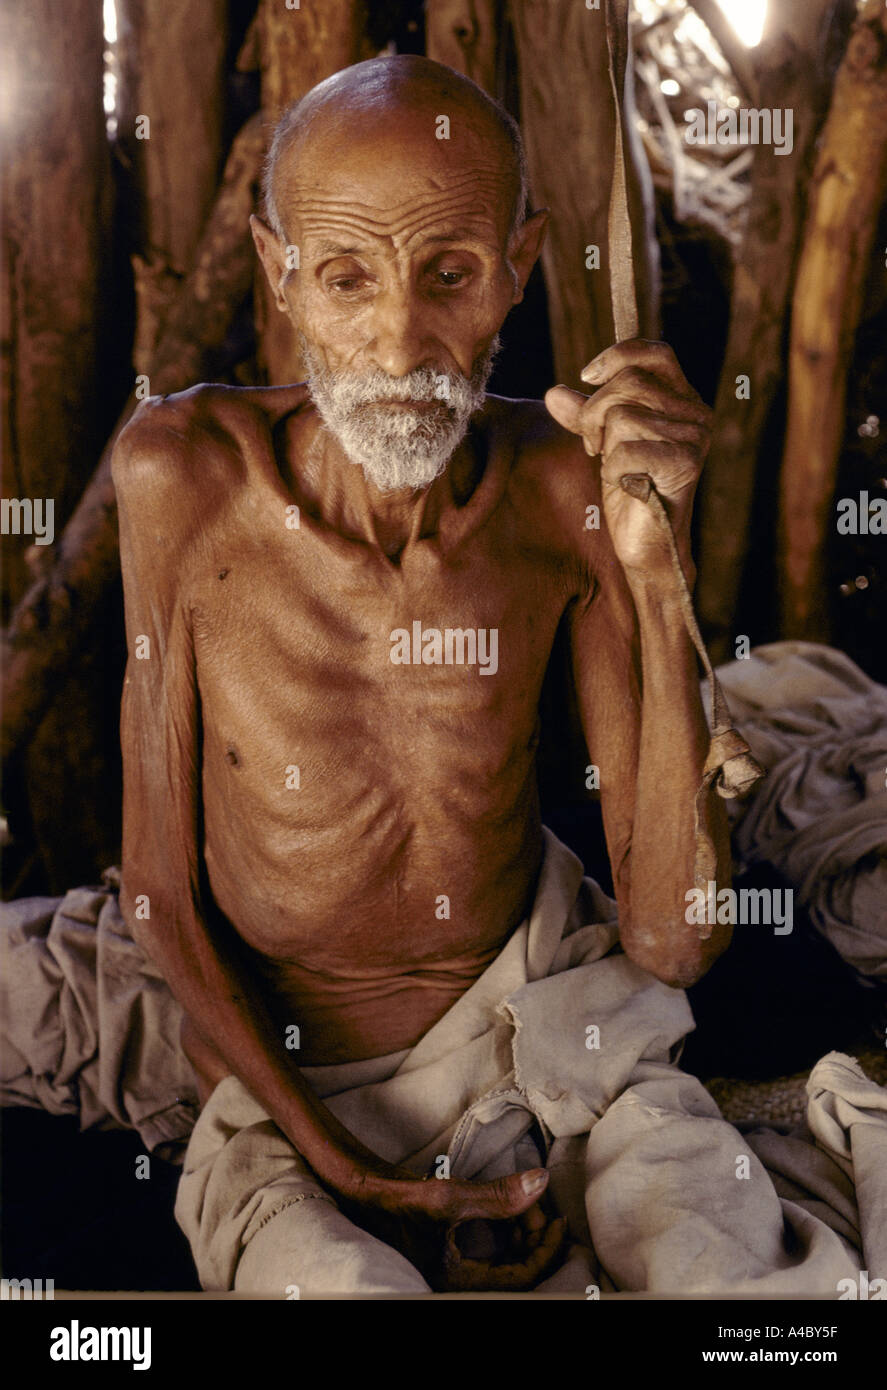 man hanging suffering from severe malnutrition Eritrea, Africa. Stock Photo